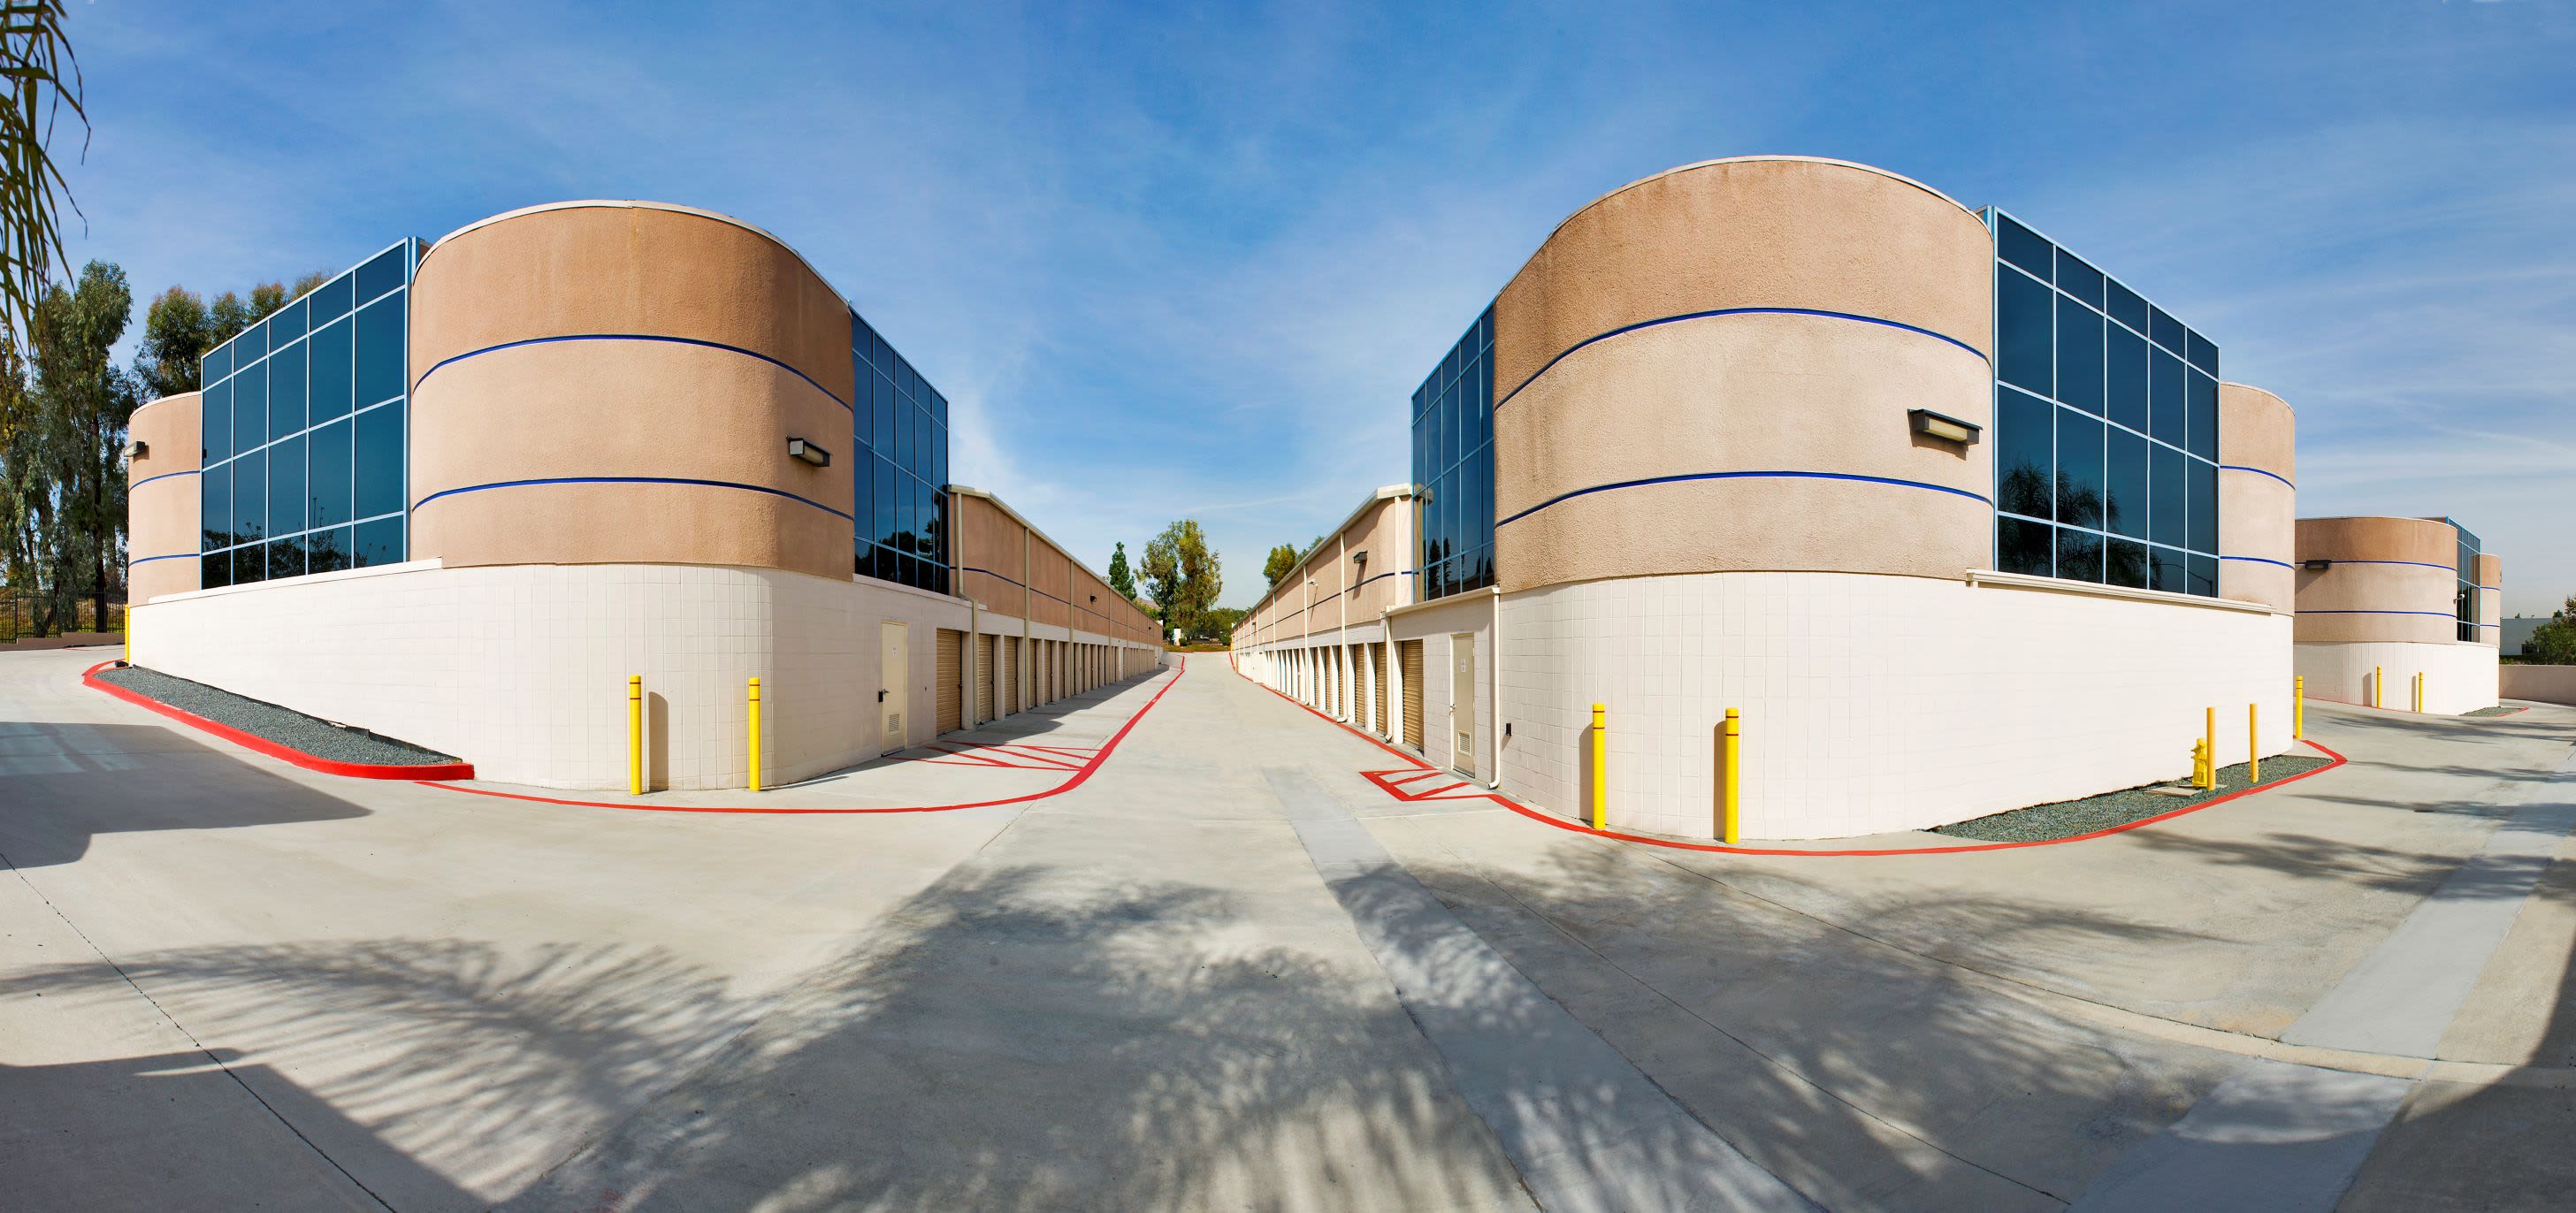 The extensive driveway at Smart Self Storage of Eastlake in Chula Vista, CA